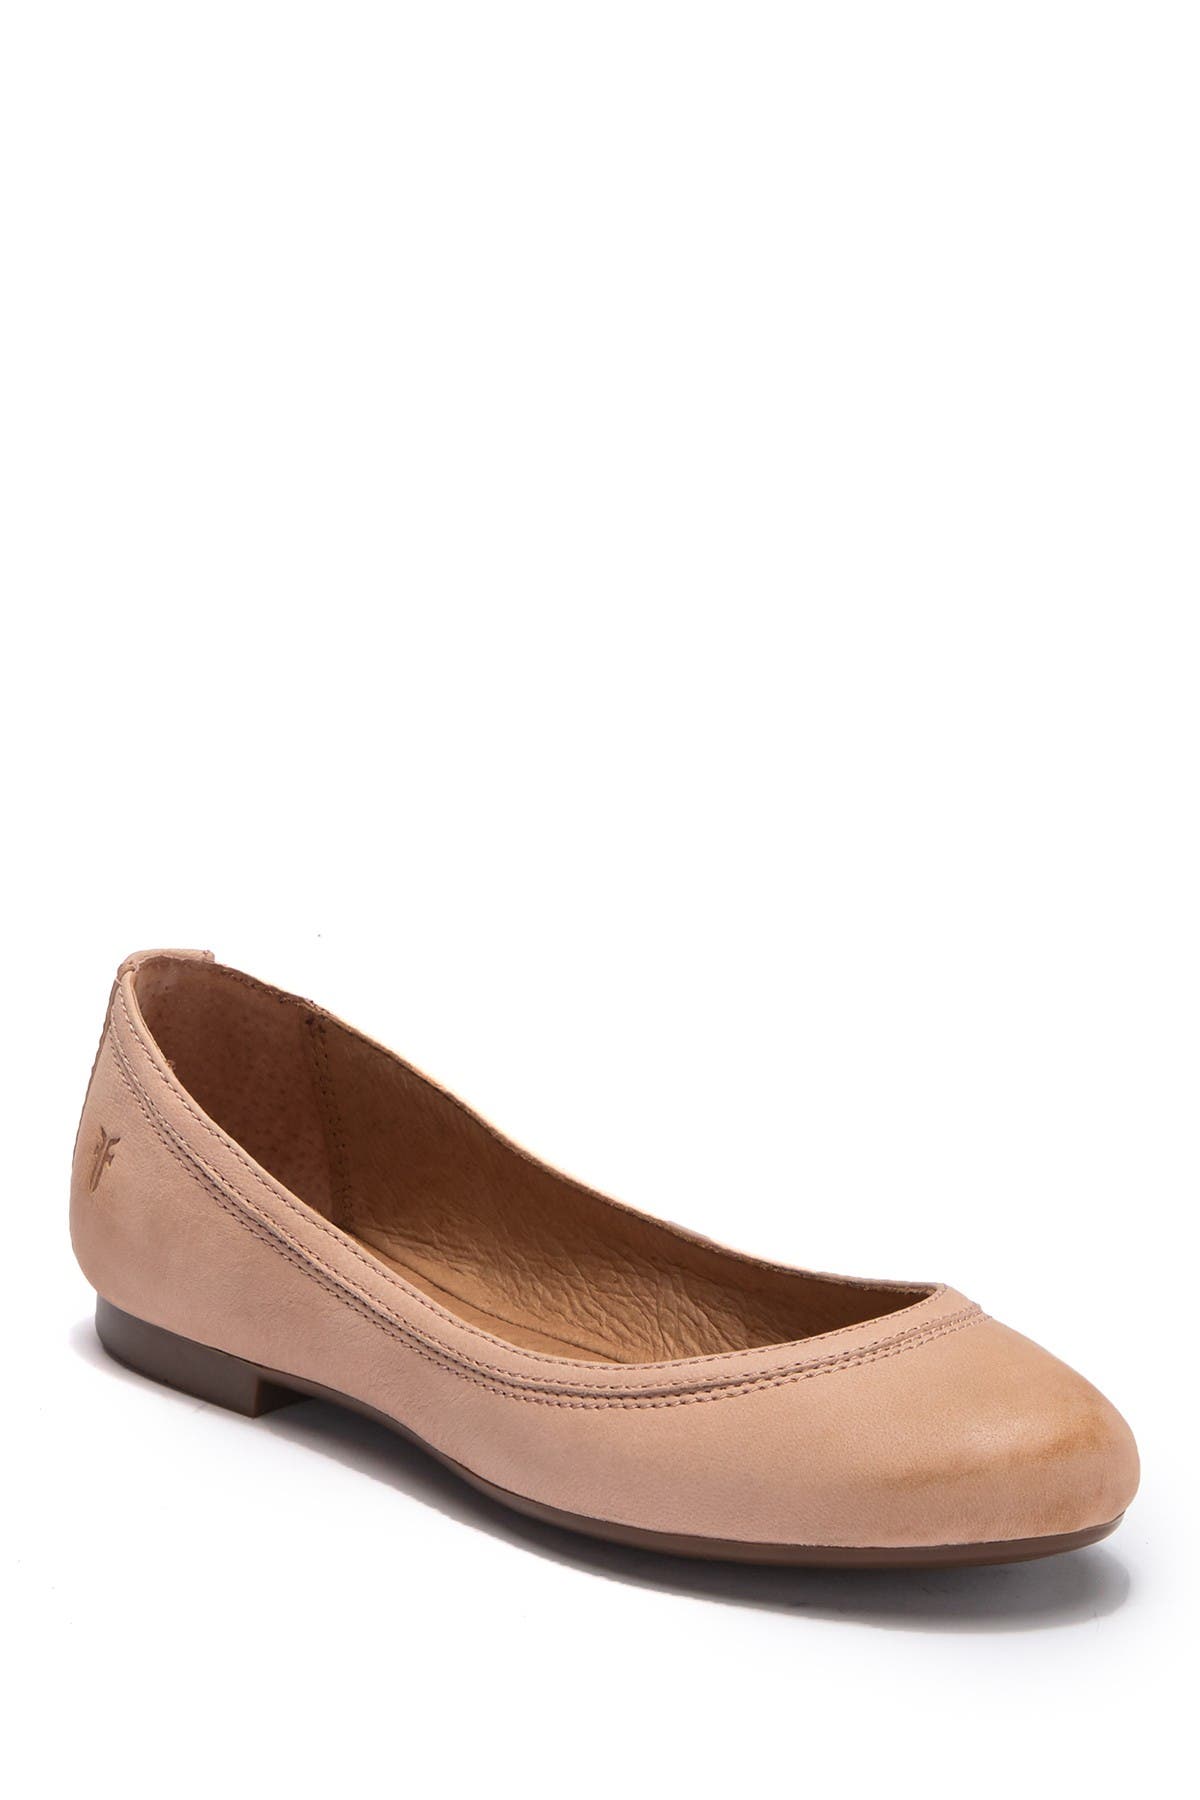 frye carrie leather flat